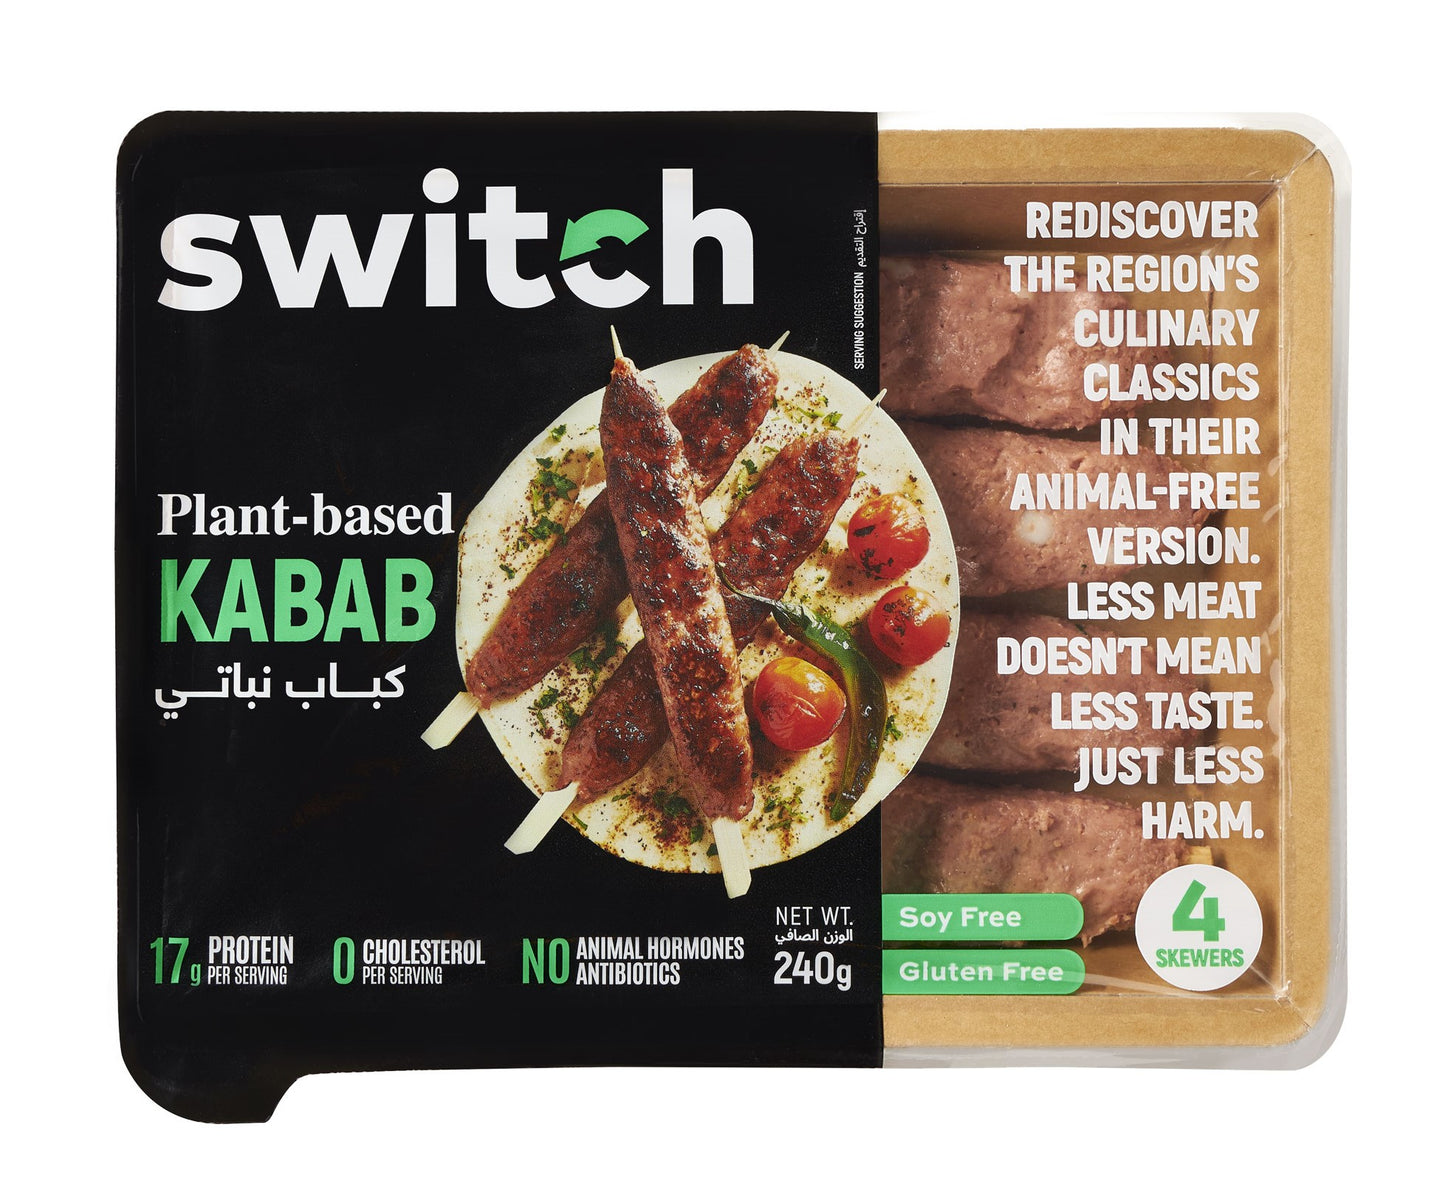 Switch 100% Plant-based Kabab, 240g, GMO-free, Cholesterol-free, Soy-free, Gluten-free, Dairy-free, Halal ( 4 Skewers) (Frozen)